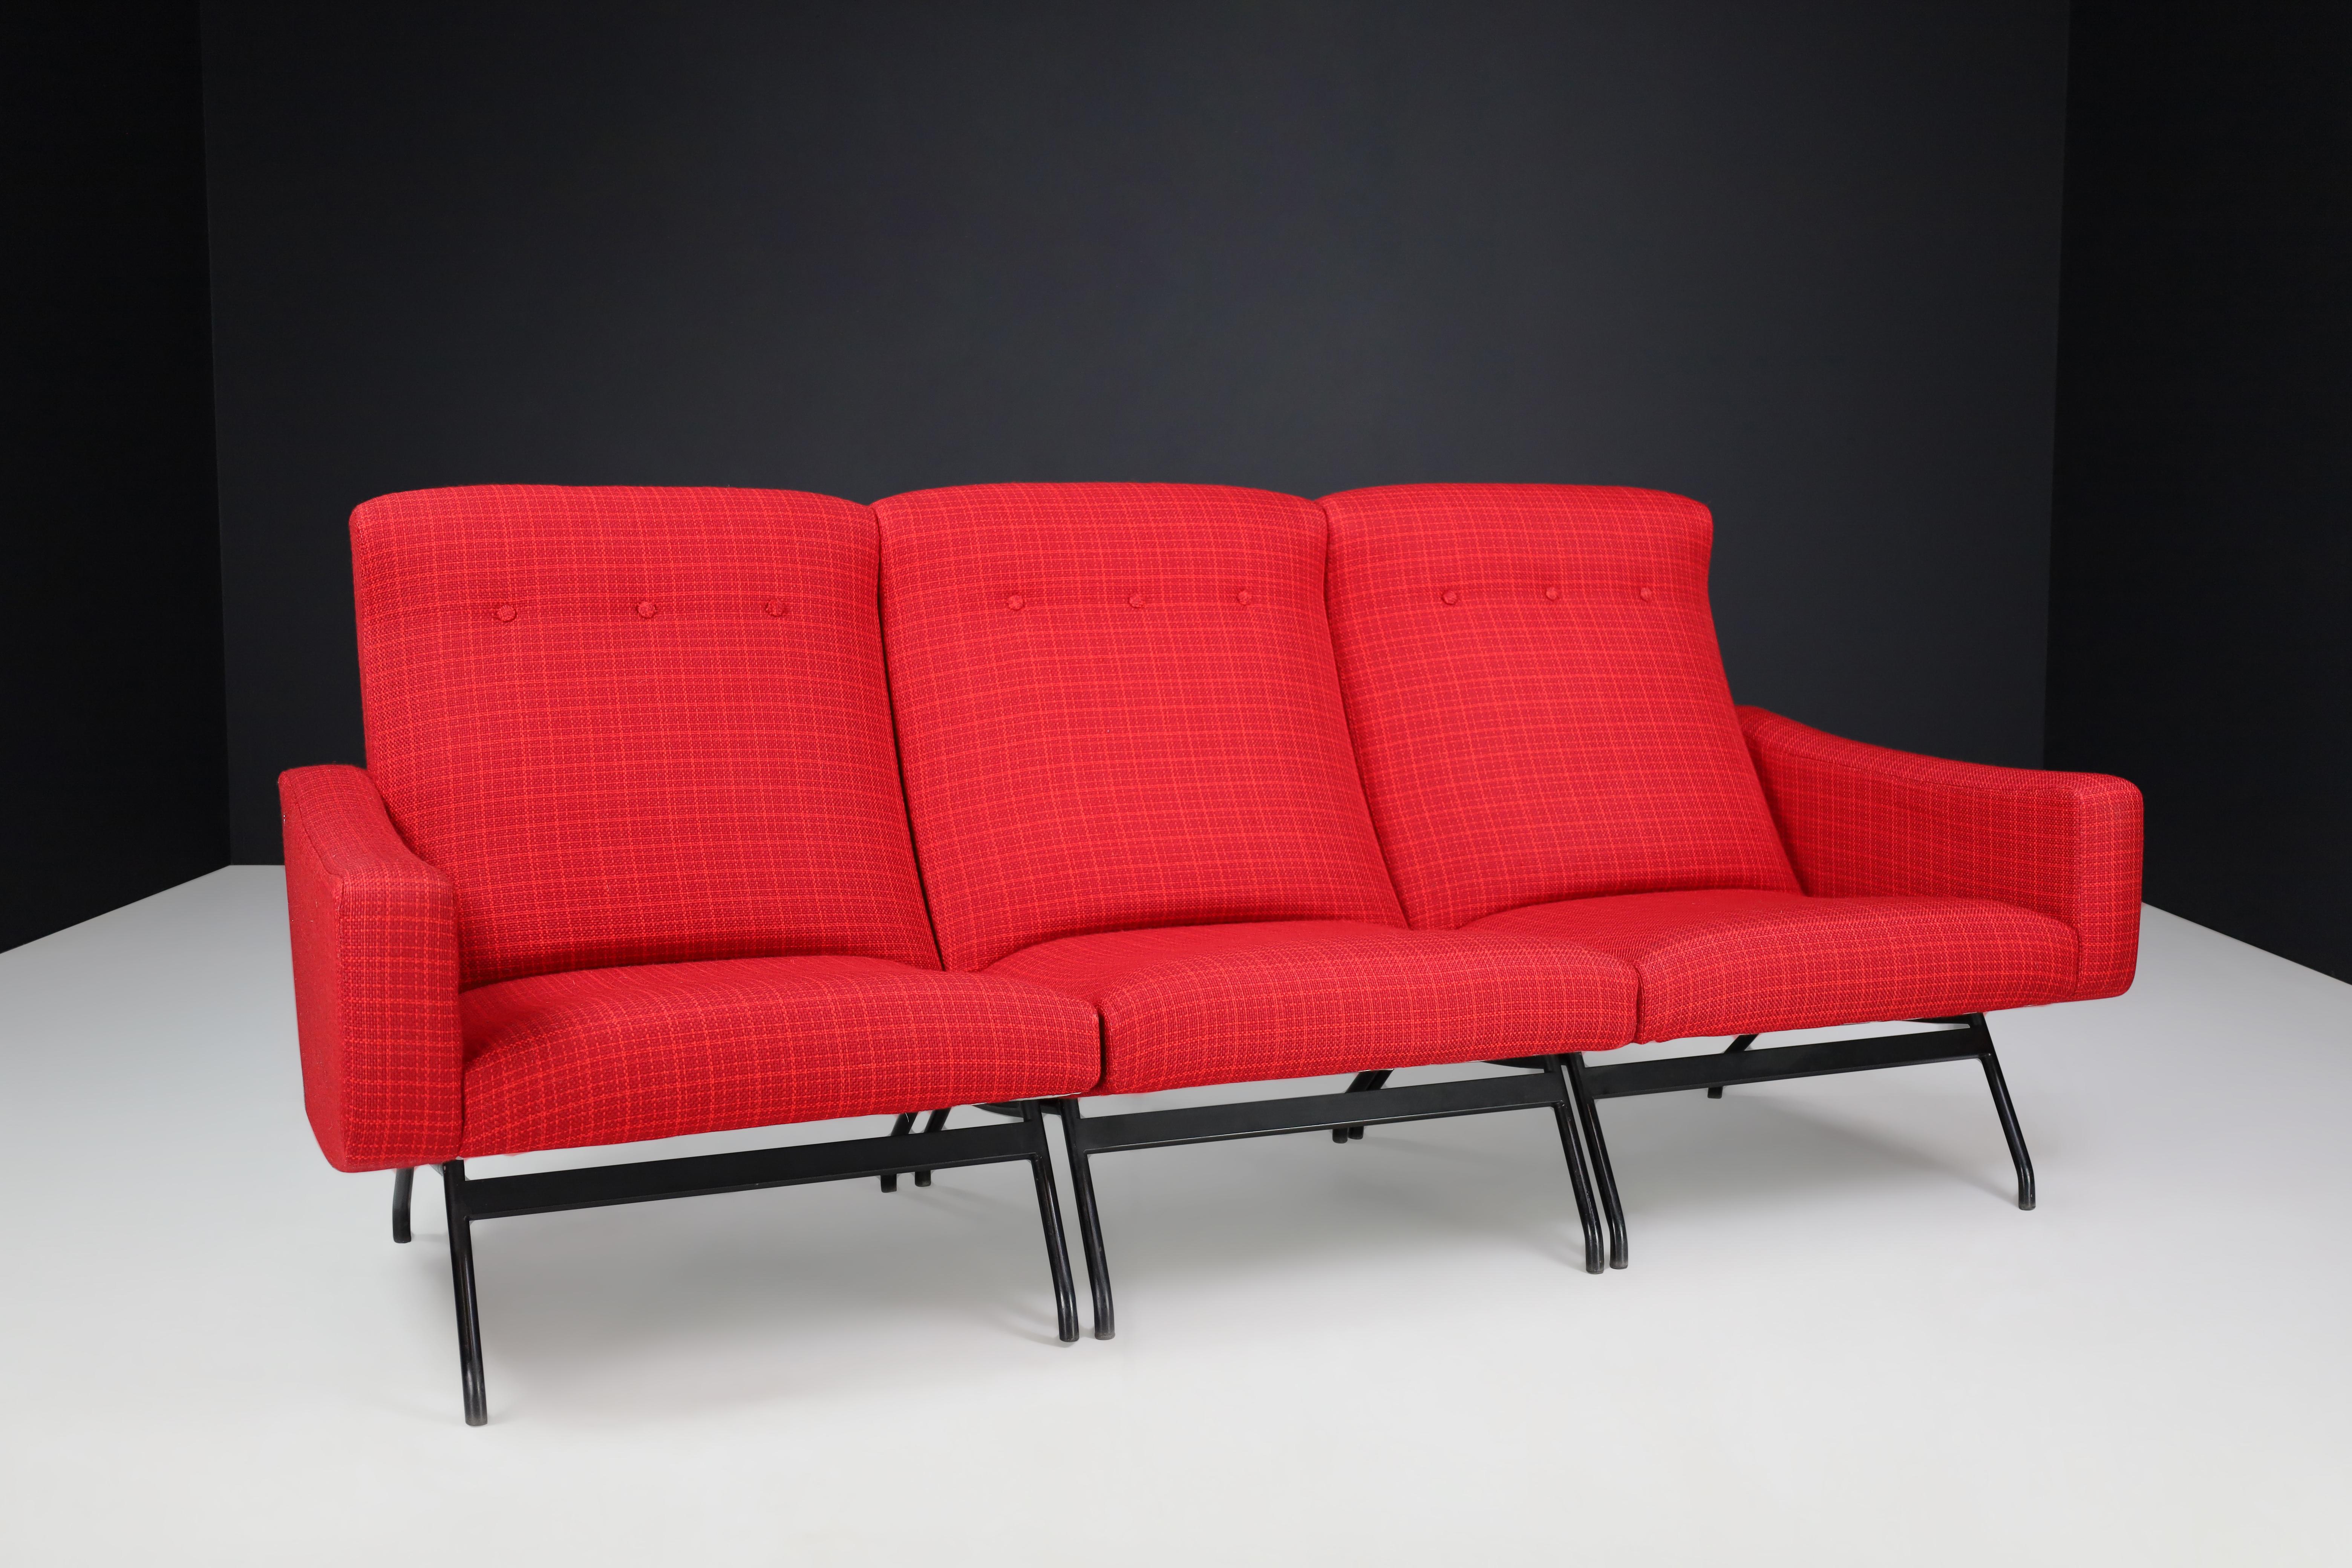 Joseph-André Motte Sectional Sofa Seat in Red Original Upholstery France, 1950s

This is a set of three sectional sofa seats designed by Joseph-Andre´ Motte in France in the 1950s and manufactured by Steiner. The seats are well-made and exhibit